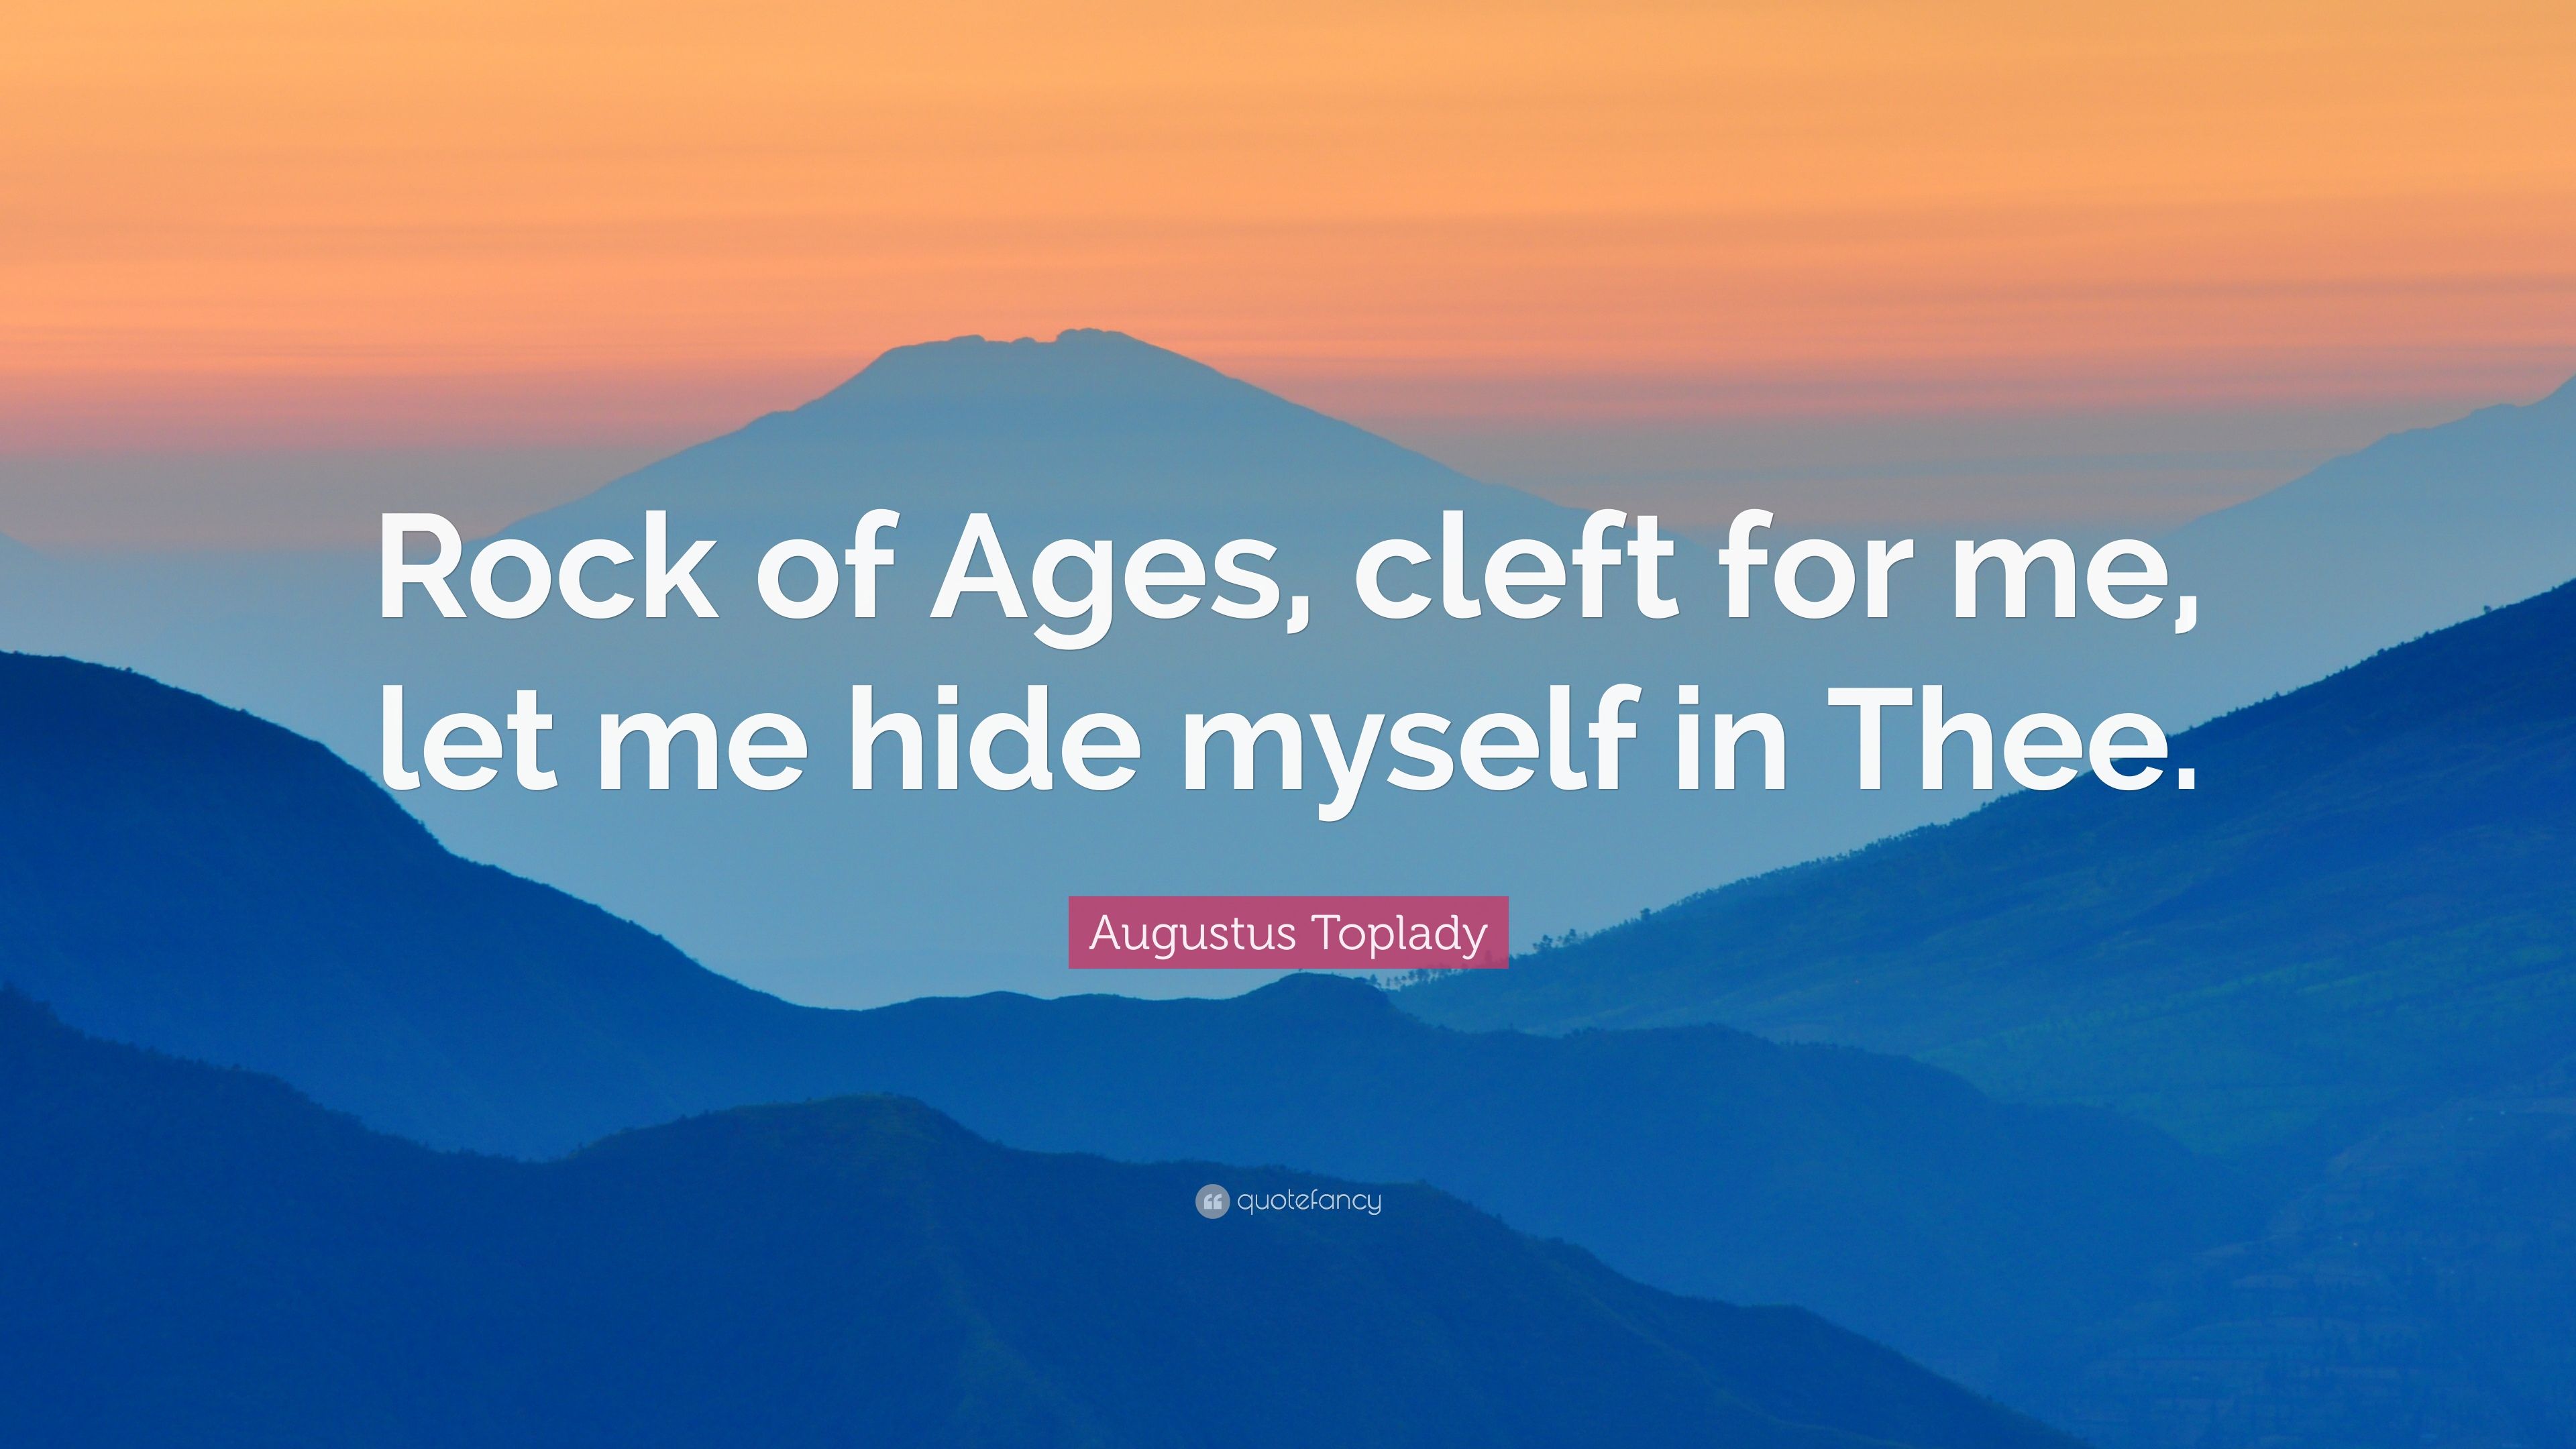 Augustus Toplady Quote: “Rock of Ages, cleft for me, let me hide